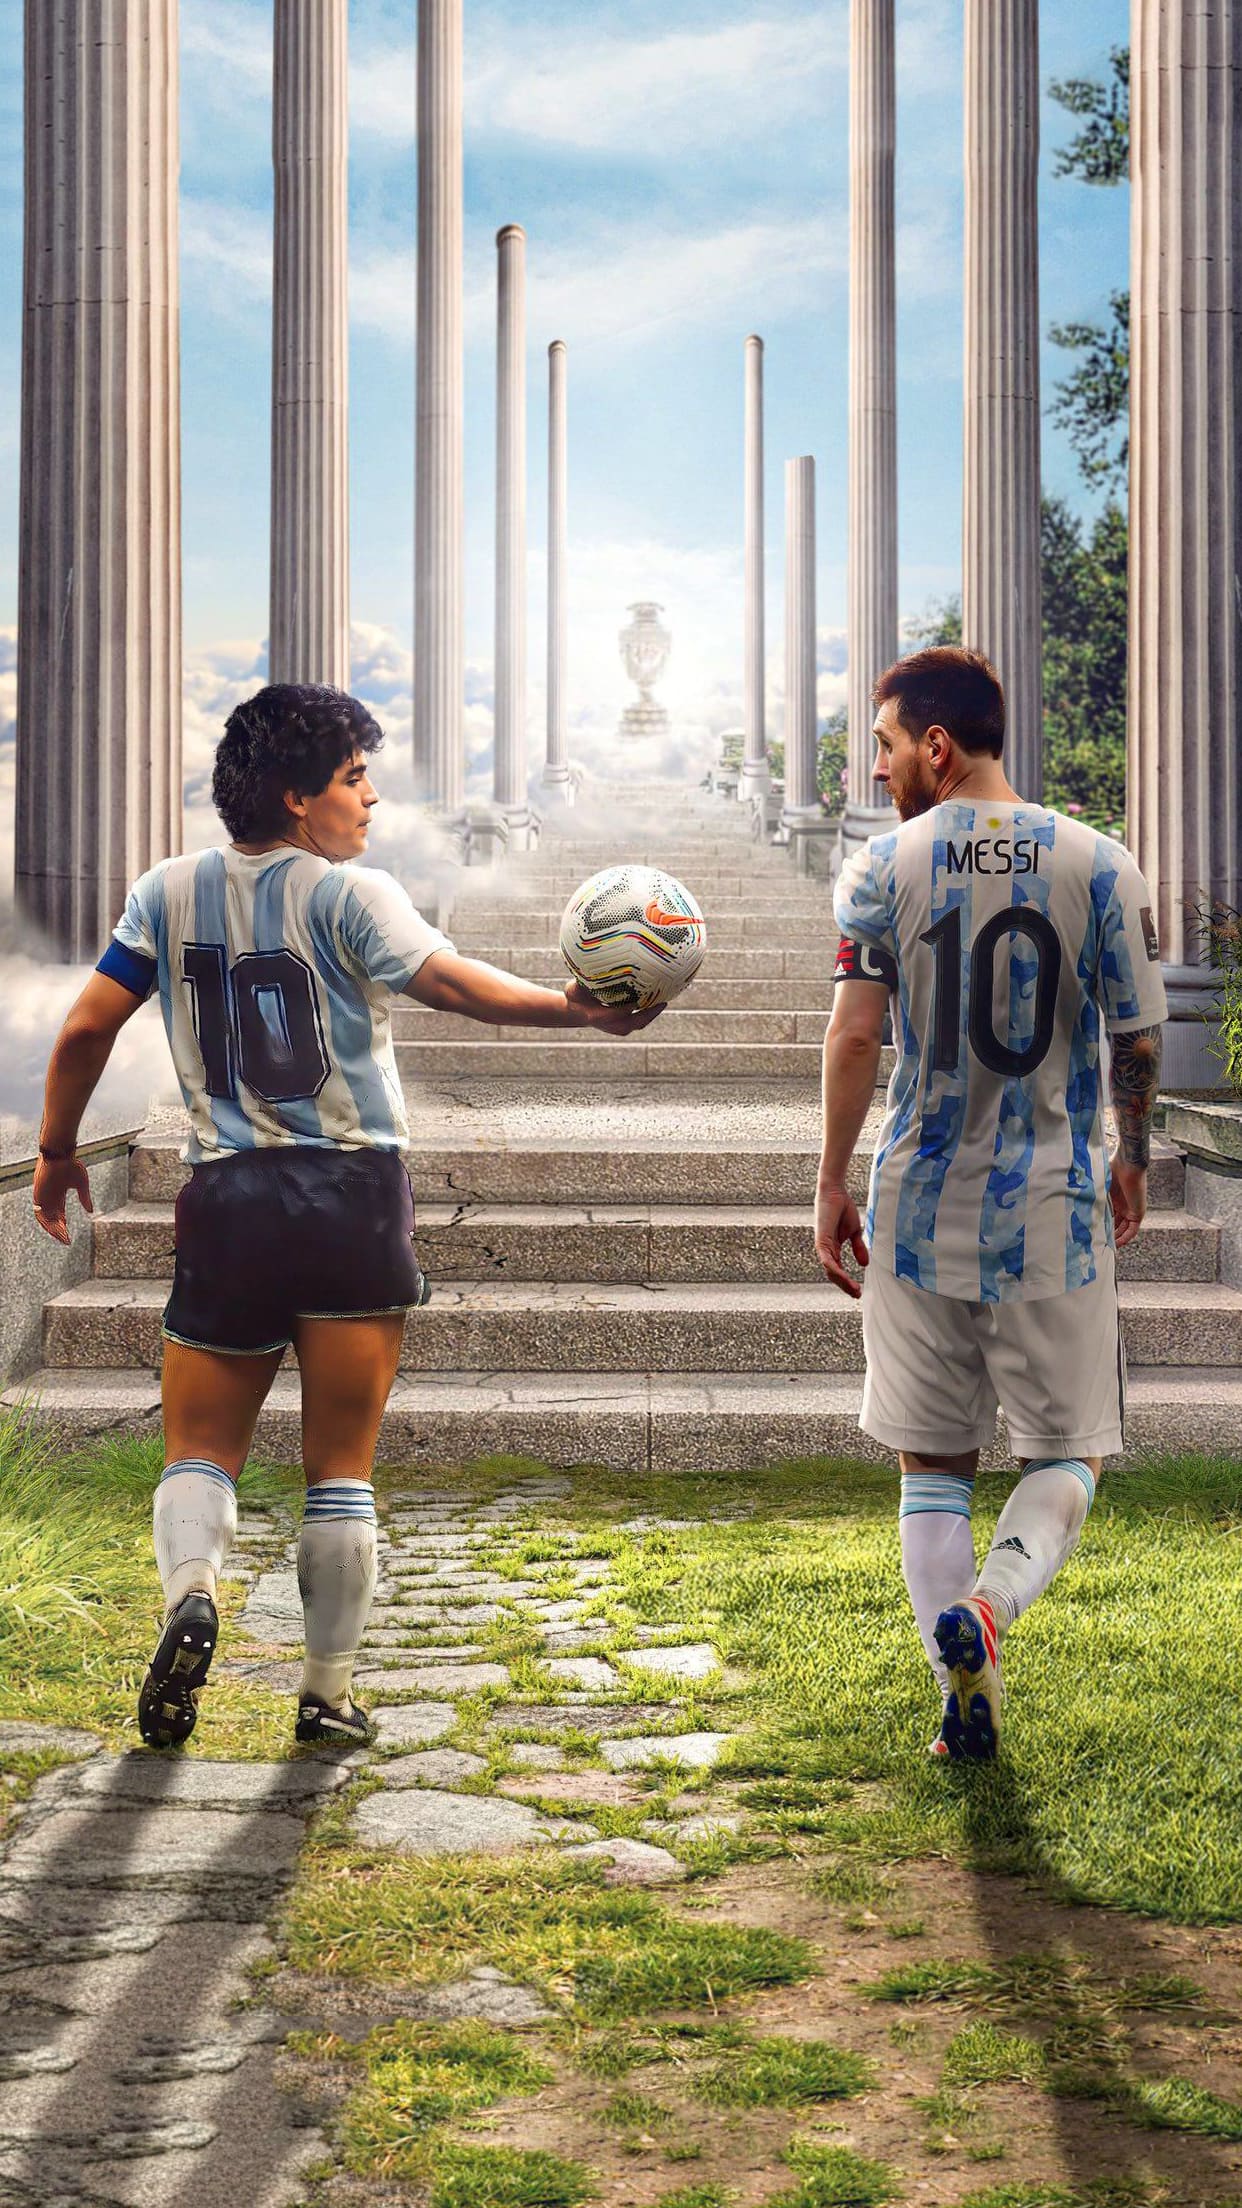 Lionel Messi and Diego Maradona in a new movie poster - Messi